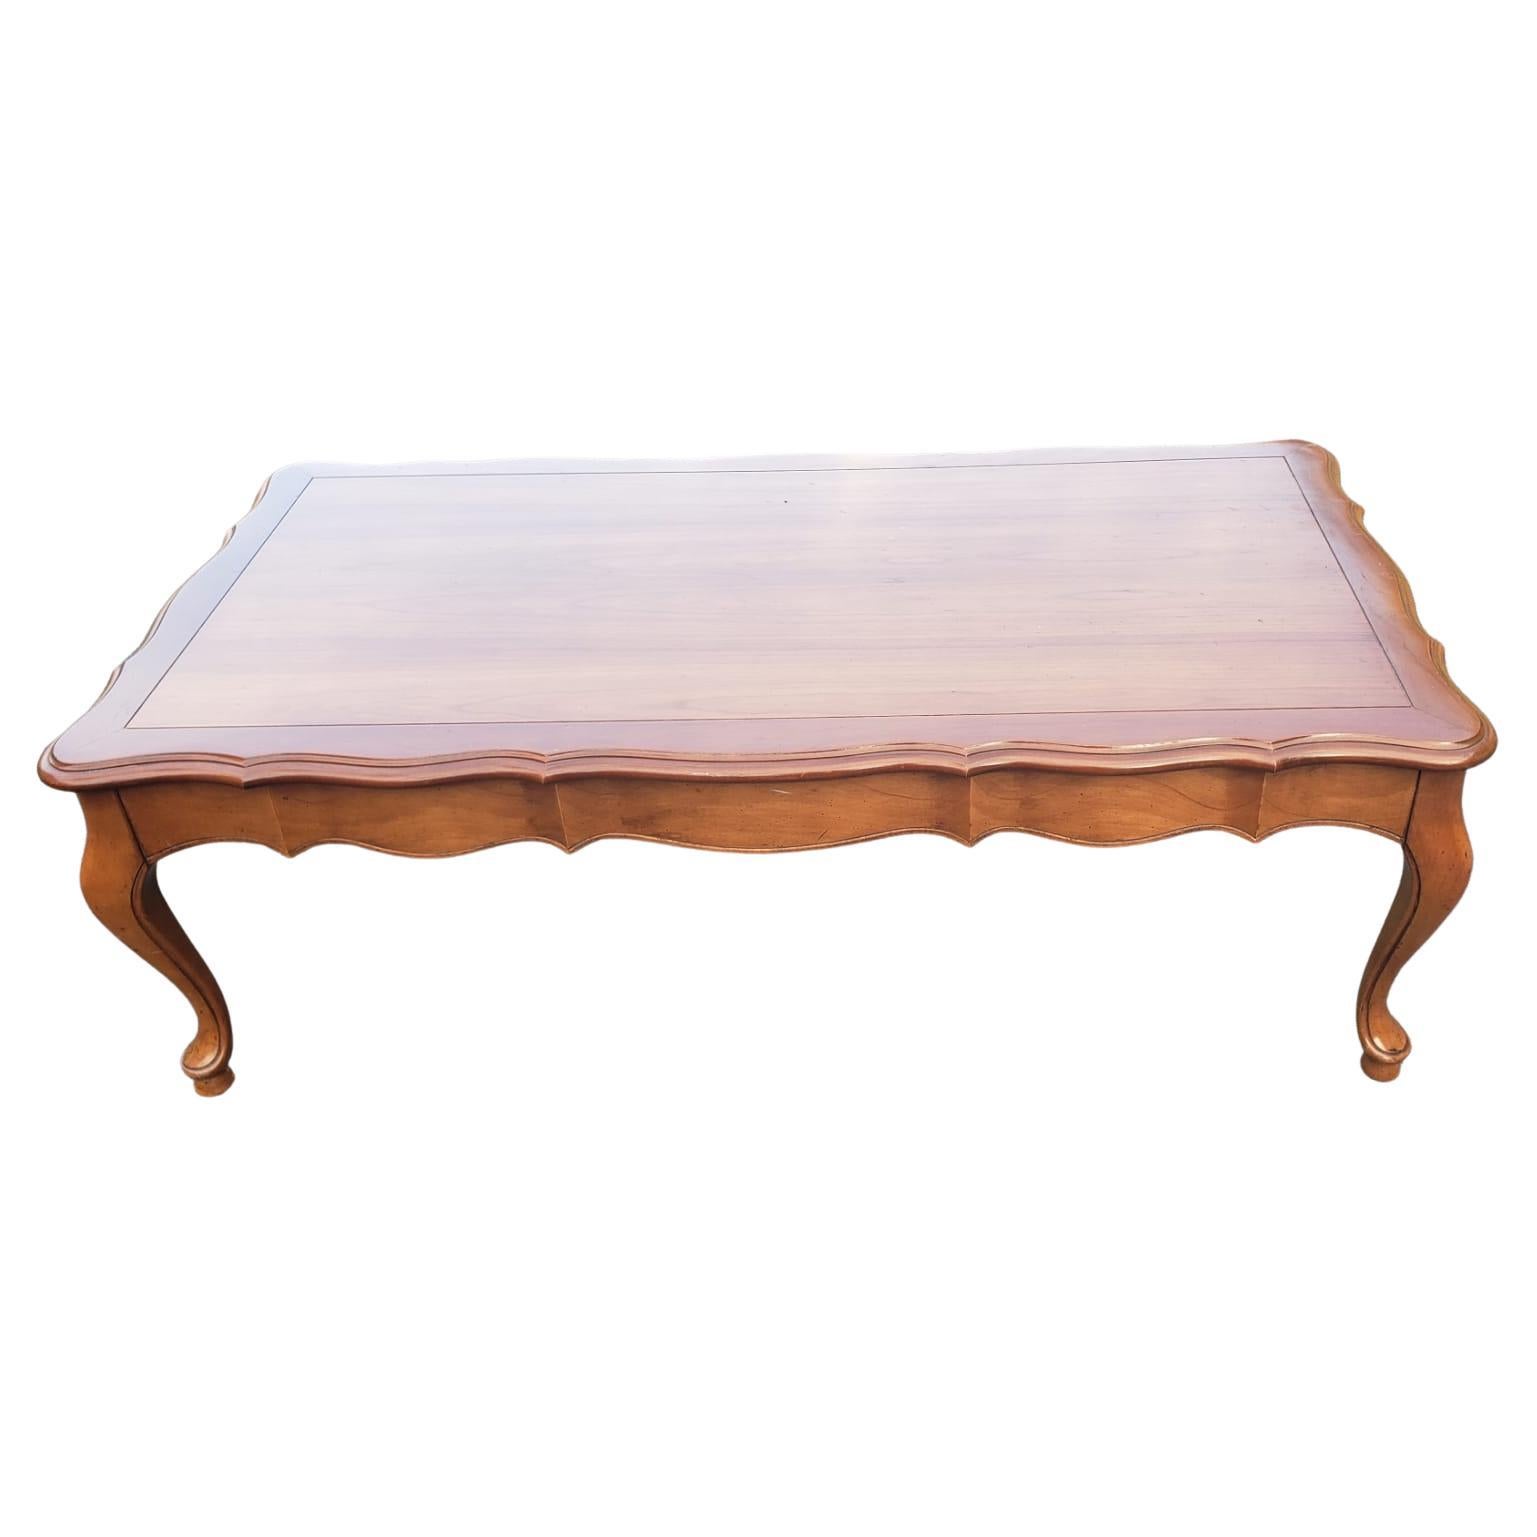 French Provincial White Furniture French Country Cocktail Coffee Table For Sale